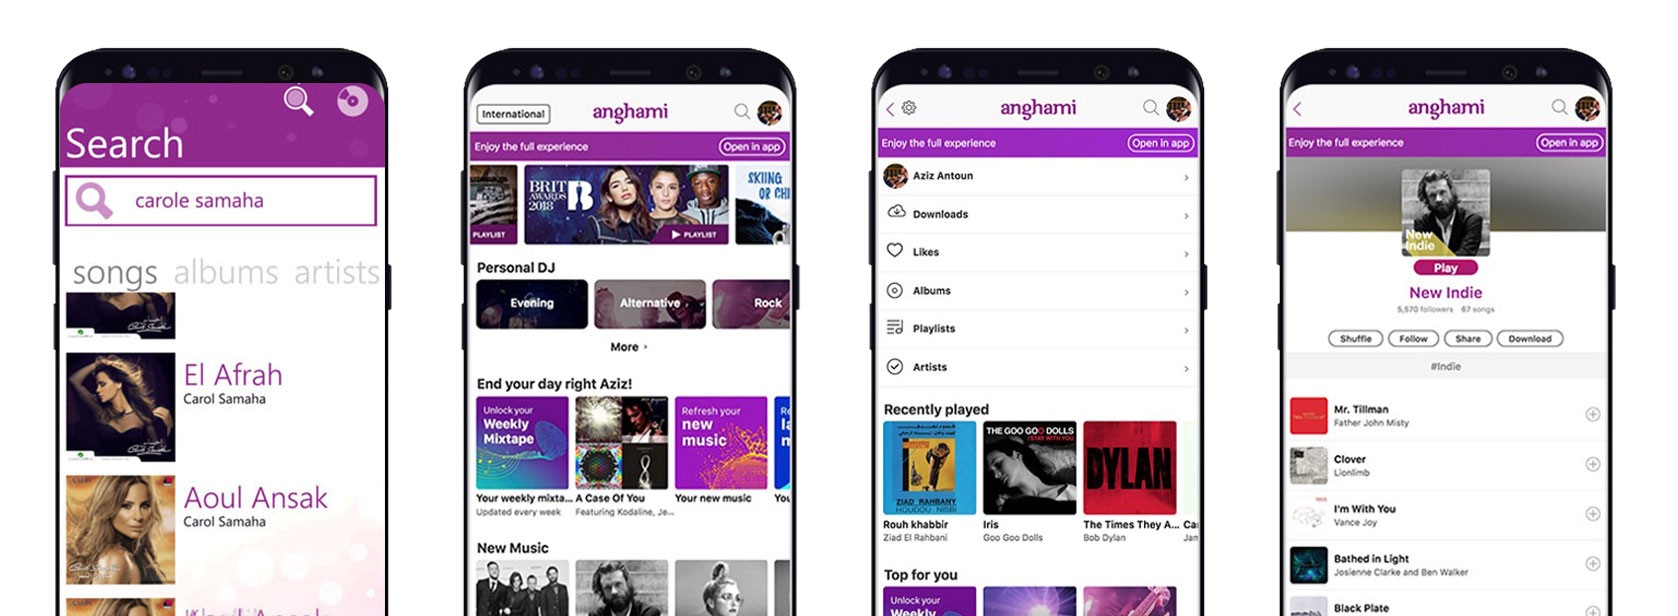 Are you looking to build an App like Anghami